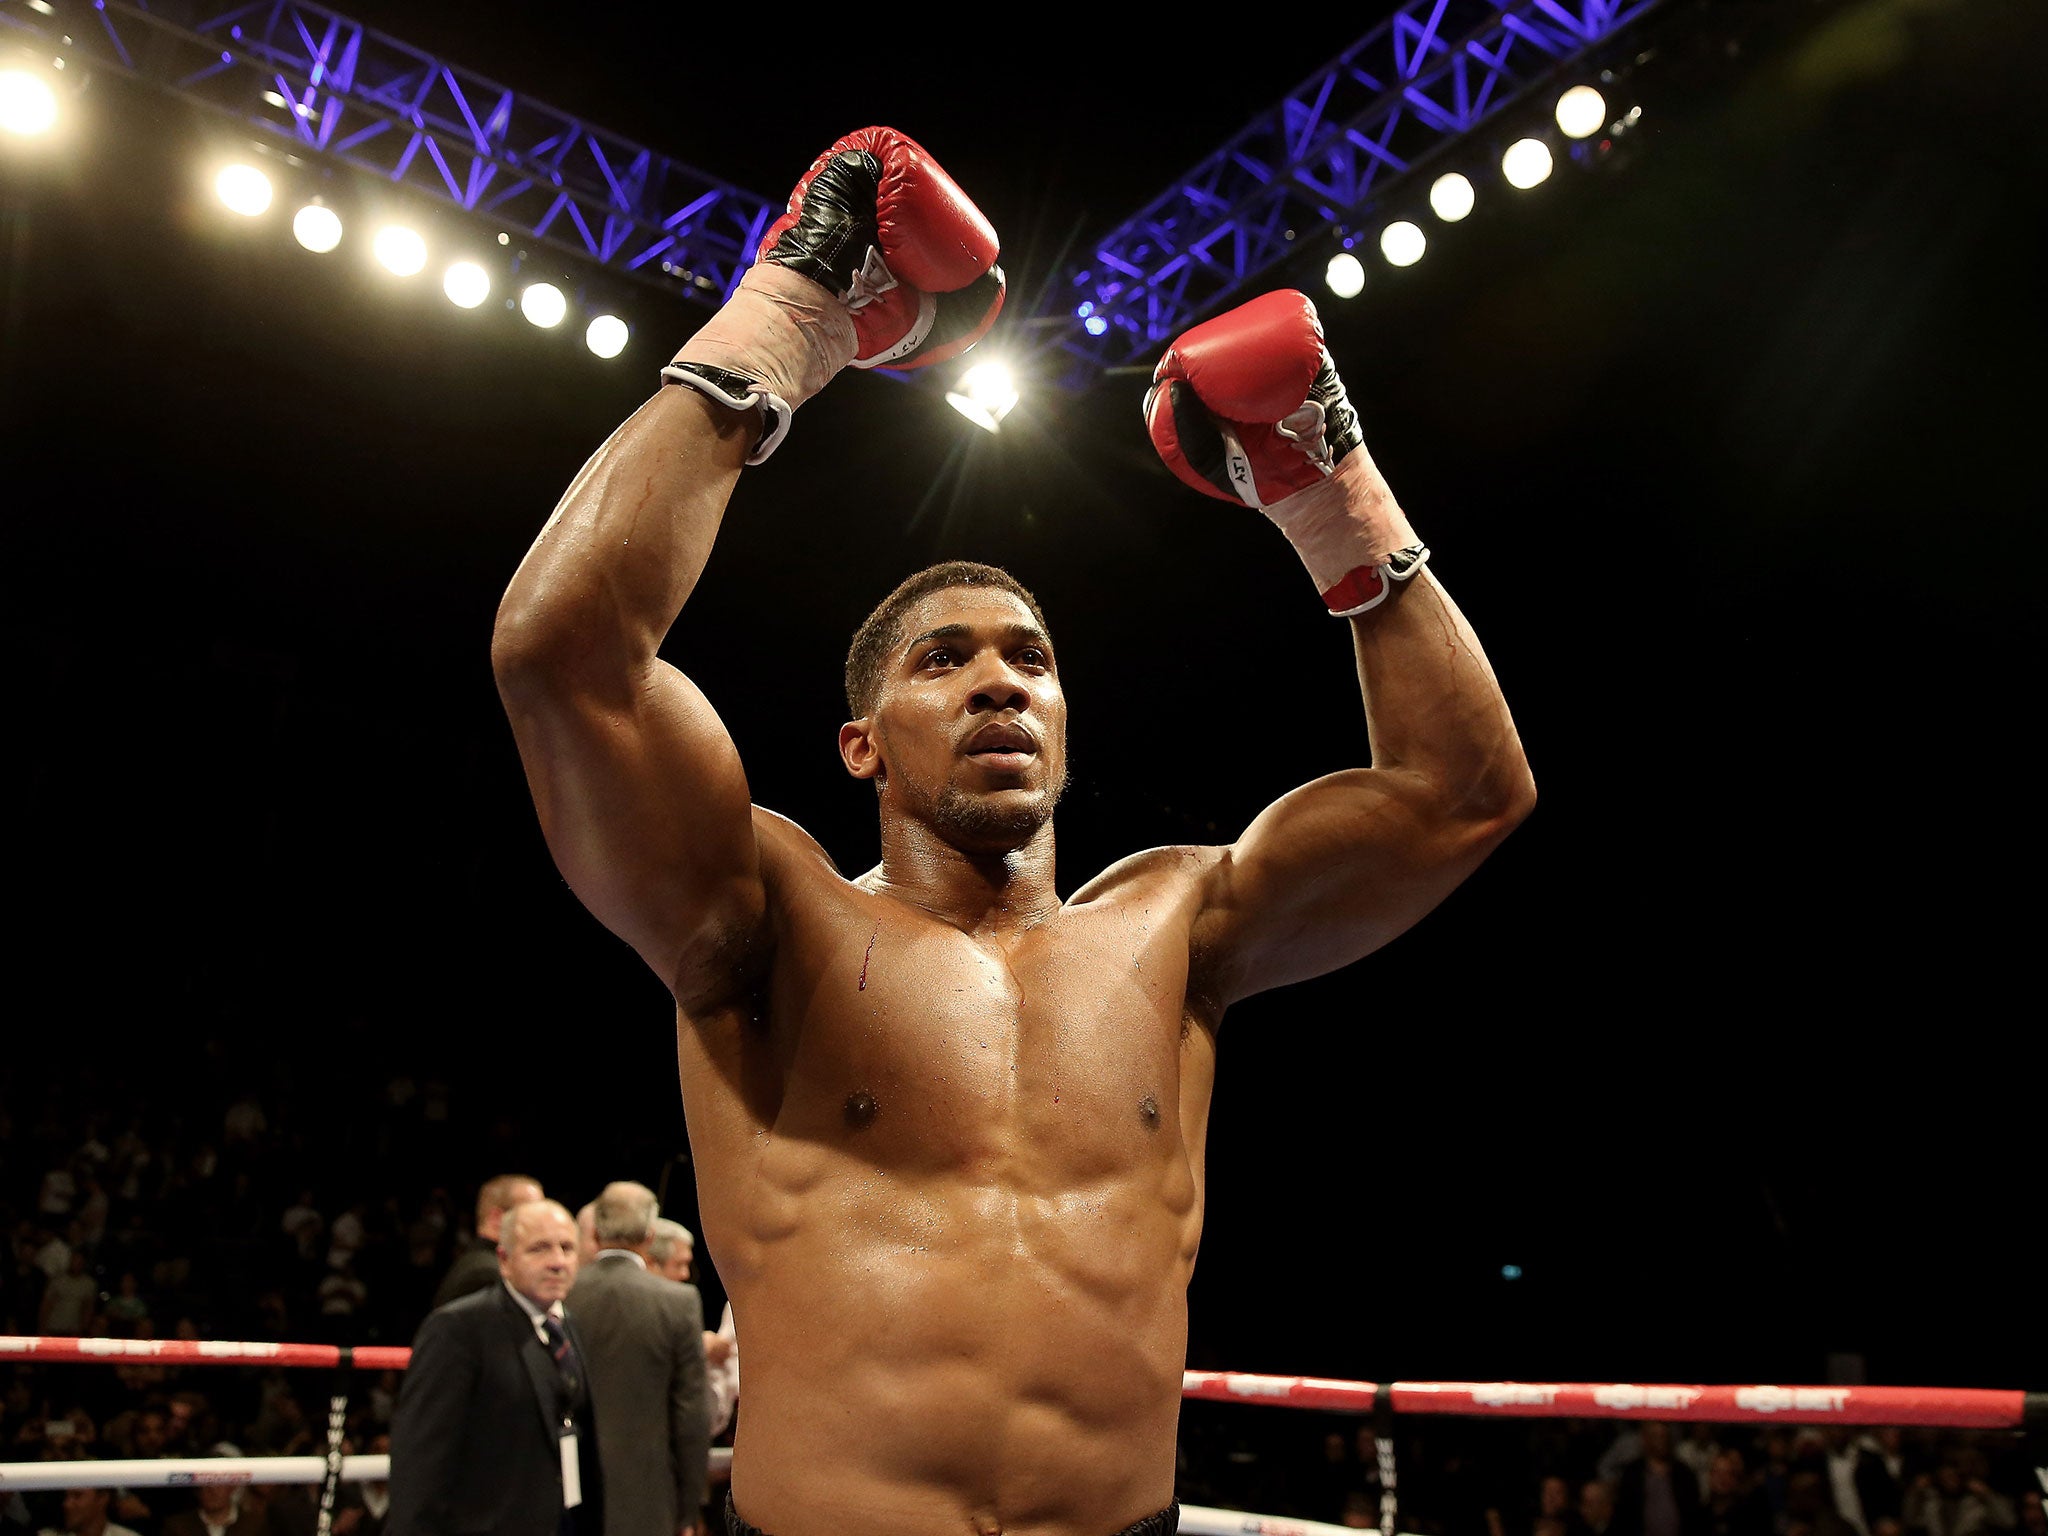 Anthony Joshua won his first title at the Haringey Box Club and often attends